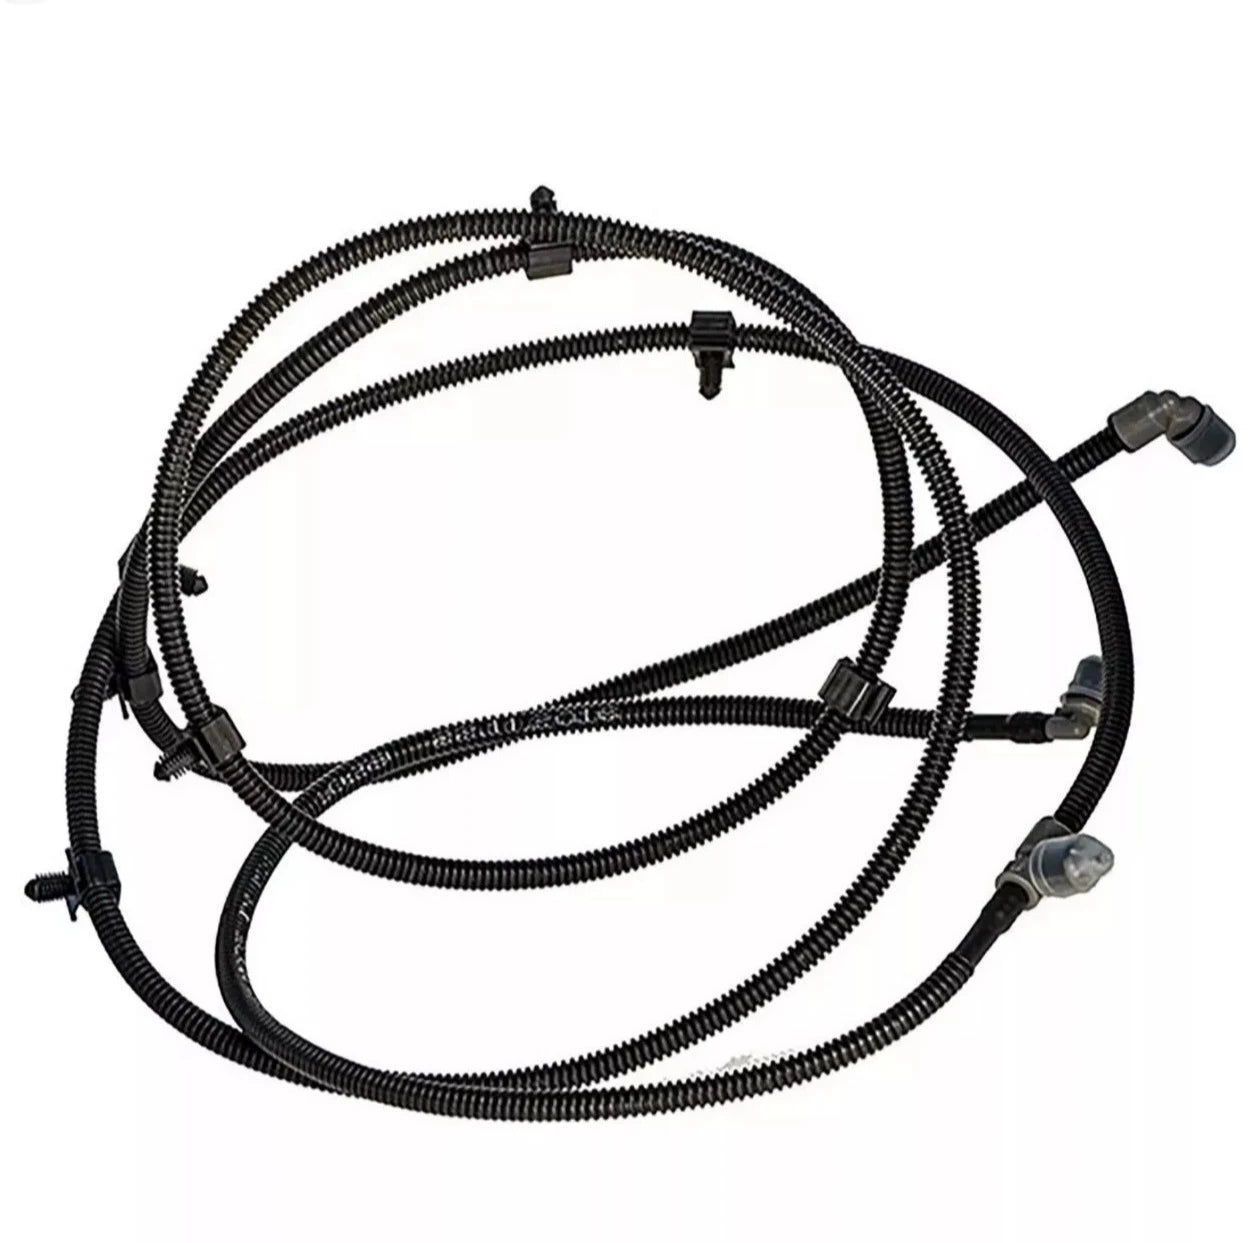 New OEM 2008-2011 Ford Focus Windshield Washer Hose Assembly, Part # 8S4Z-17K605-AA